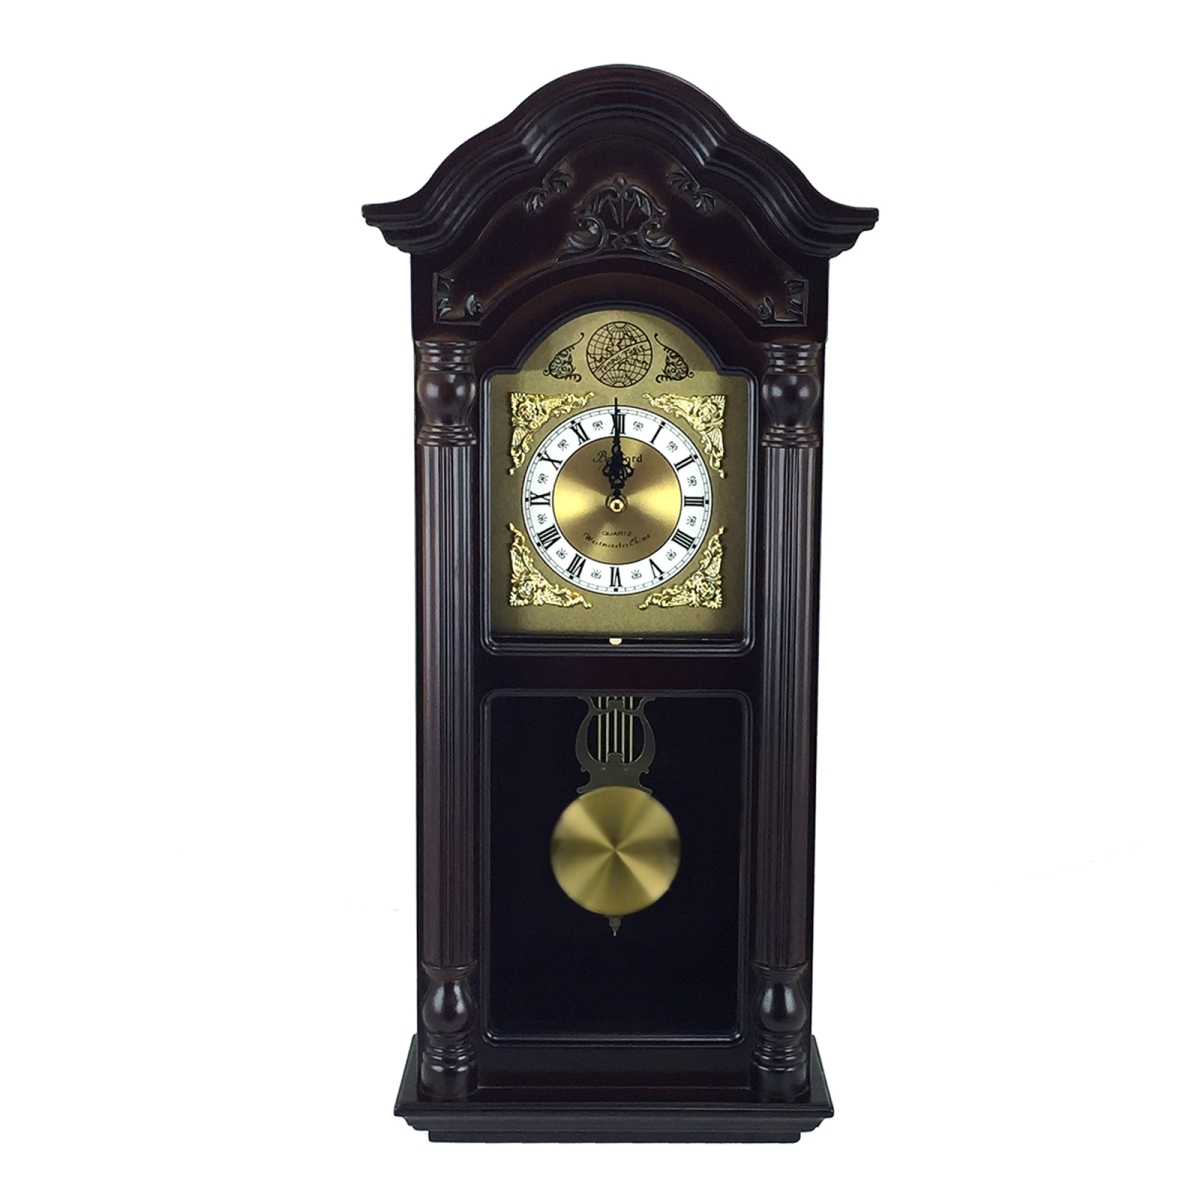 Picture of Bedford Clock Collection BED-9018 25.5 in. Antique Mahogany Cherry Oak Chiming Wall Clock with Roman Numerals